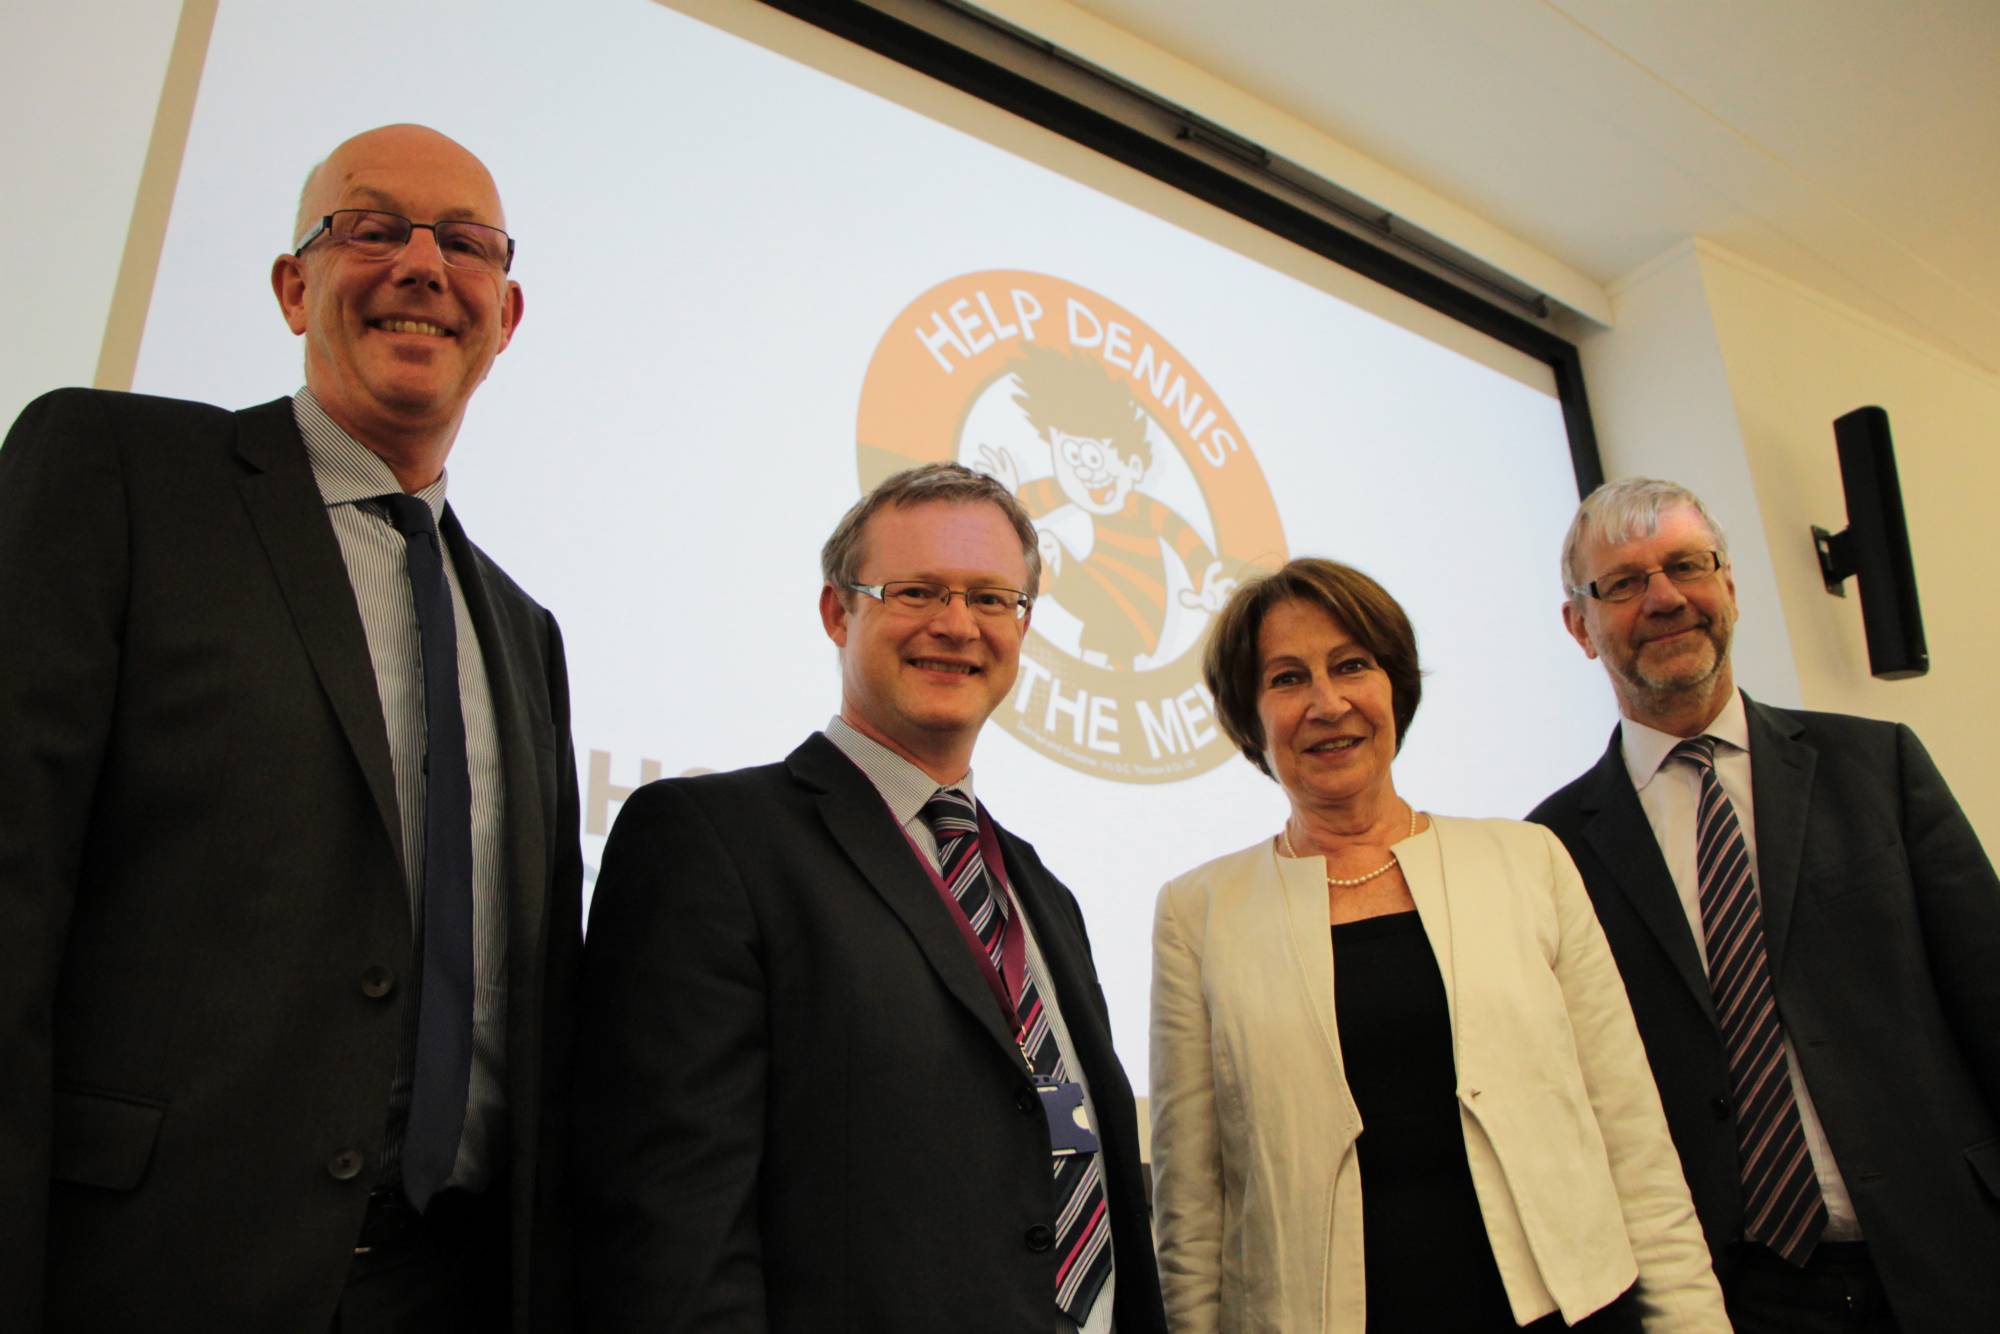 Dean of the school of medicine professor Gary Mires, Professor Russell Petty, Lady Fiona Fraser and Professor Sir Pete Downes.